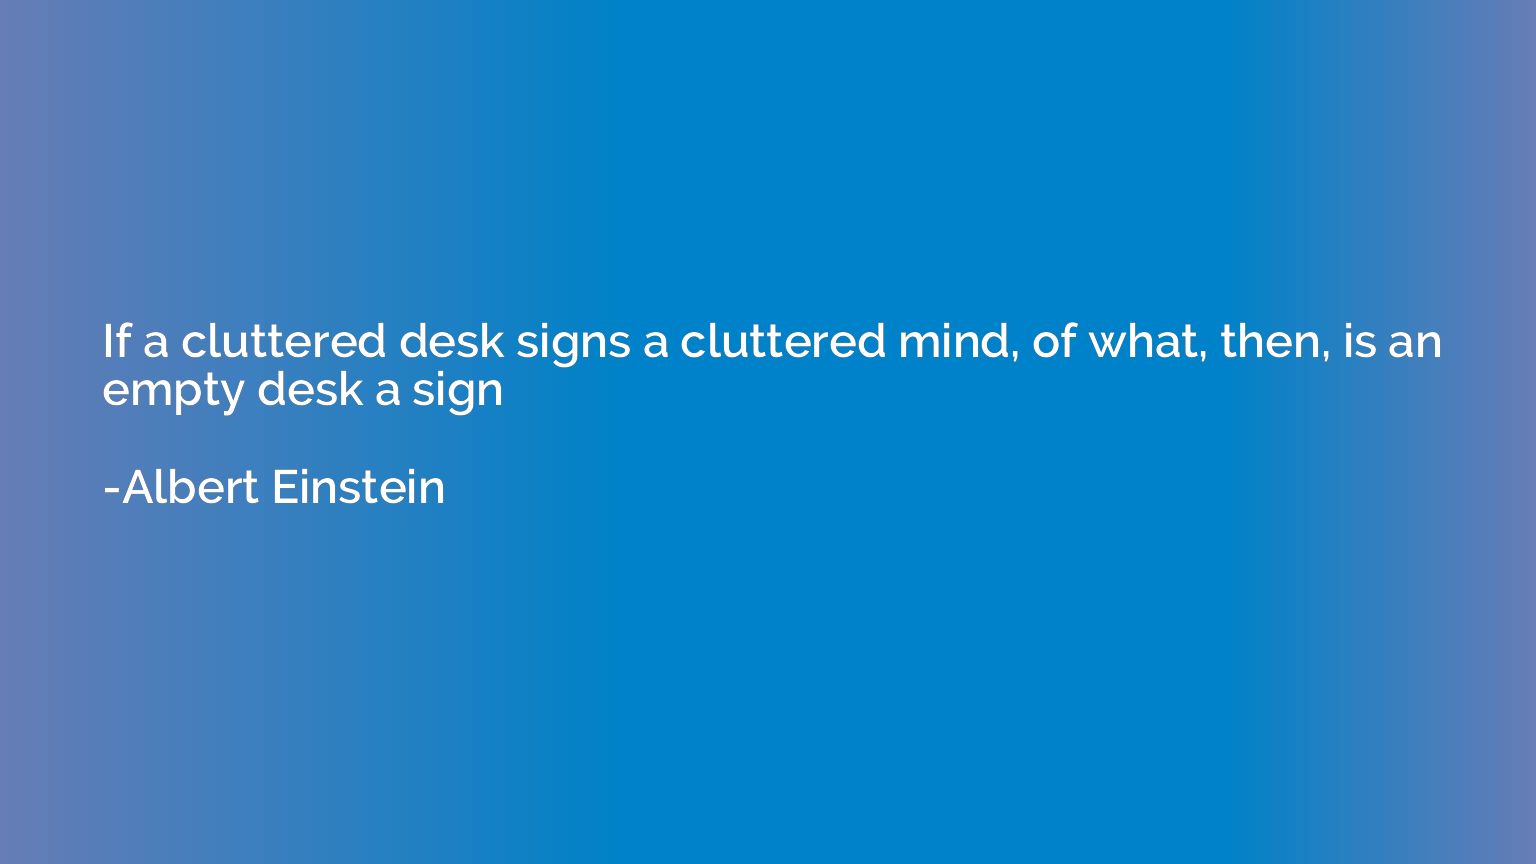 If a cluttered desk signs a cluttered mind, of what, then, i